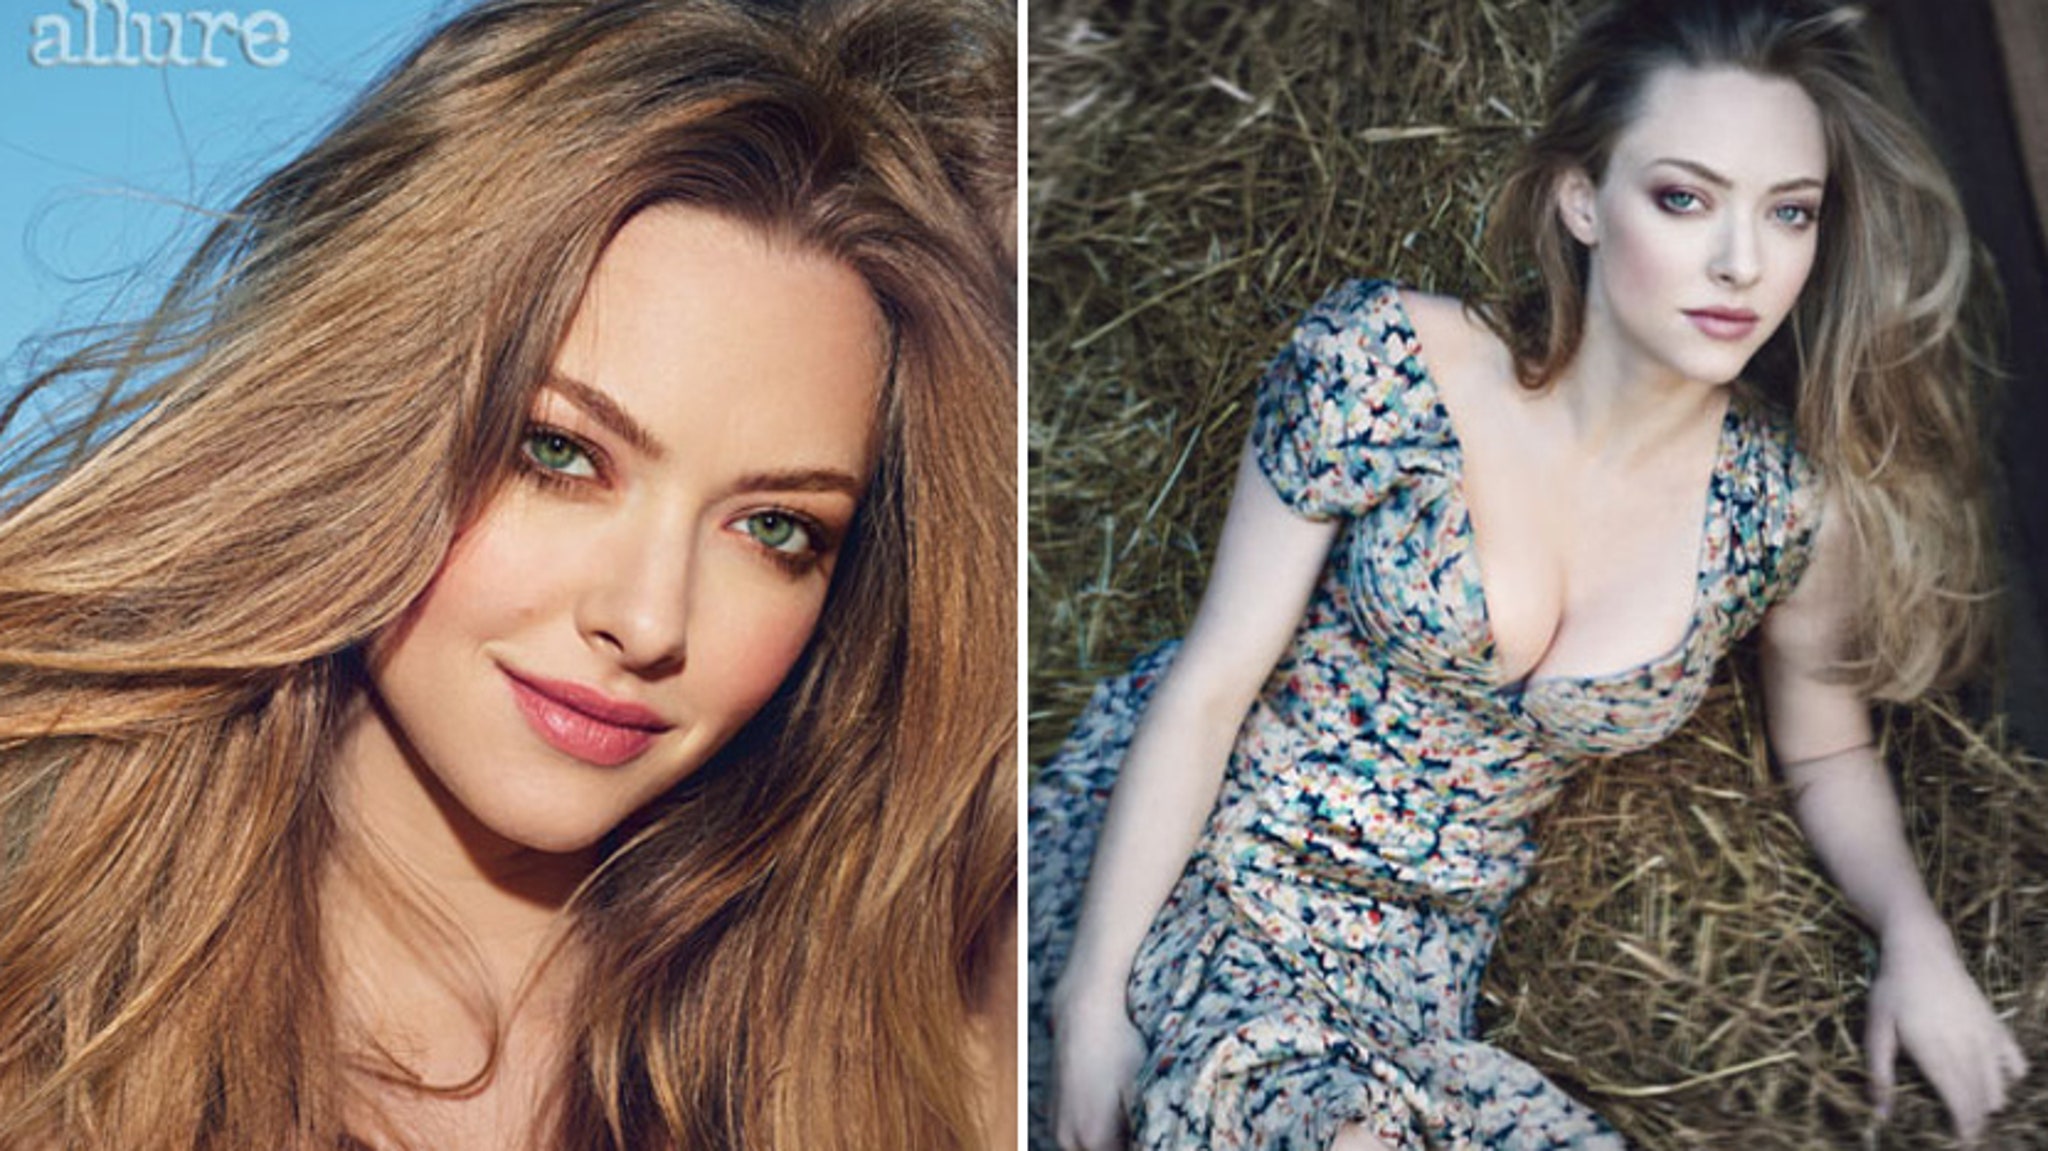 What size are Amanda Seyfried's breasts boobs?